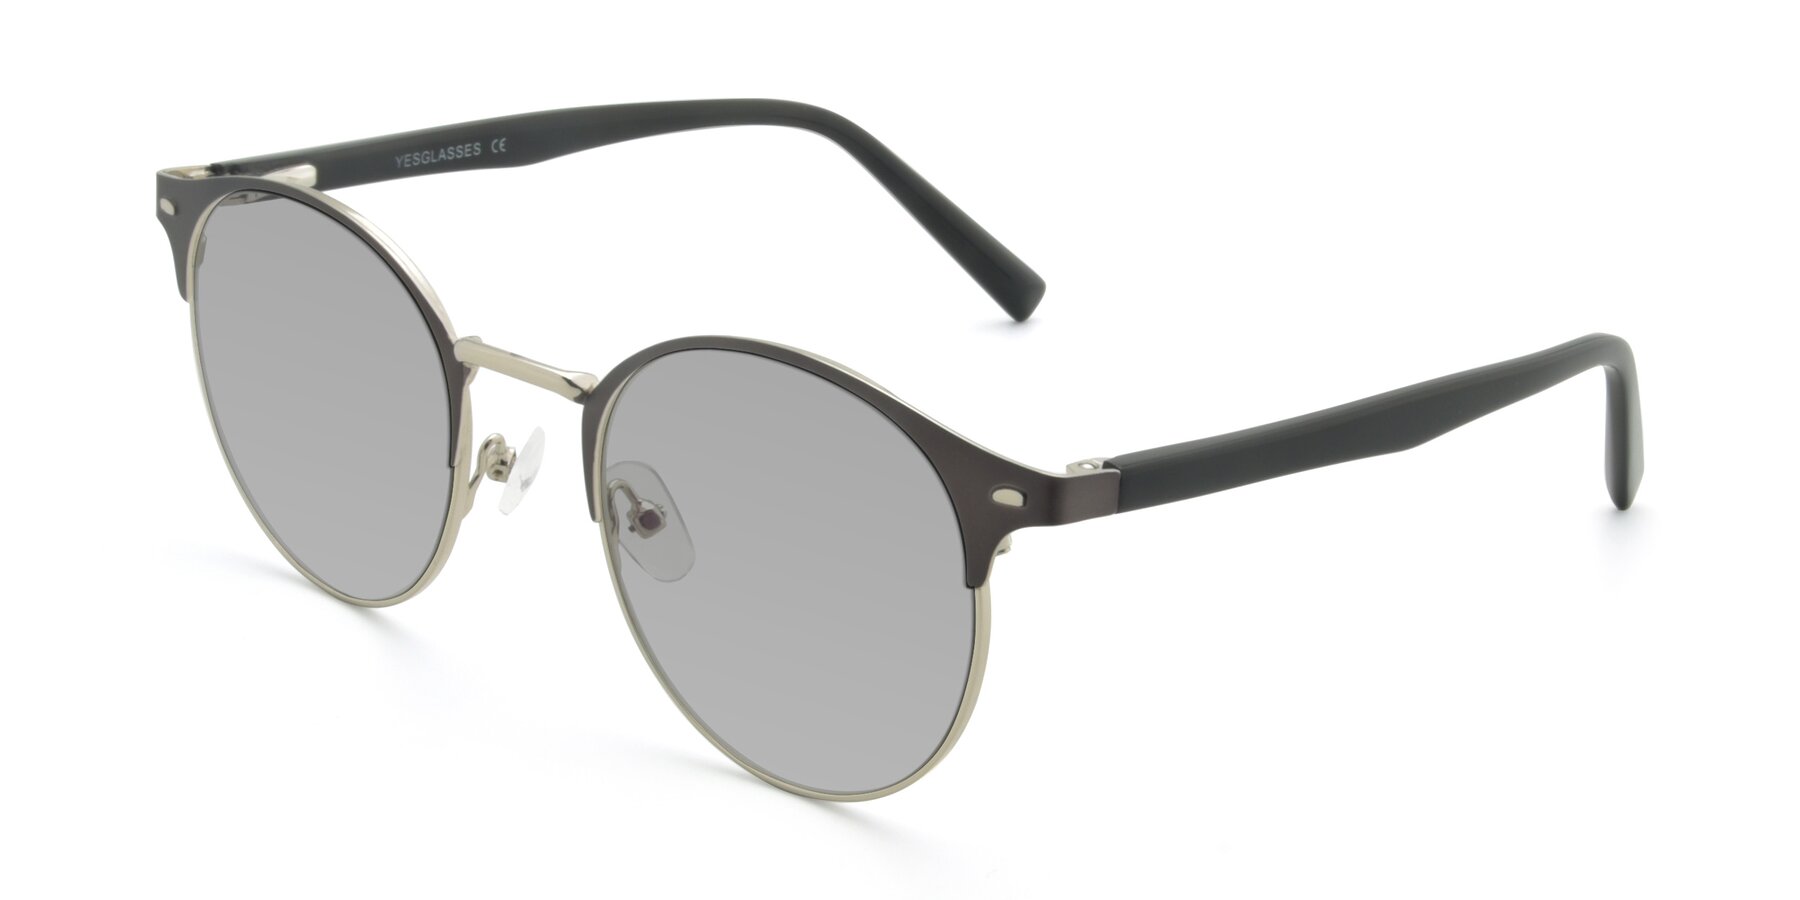 Angle of 9099 in Gray-Silver with Light Gray Tinted Lenses